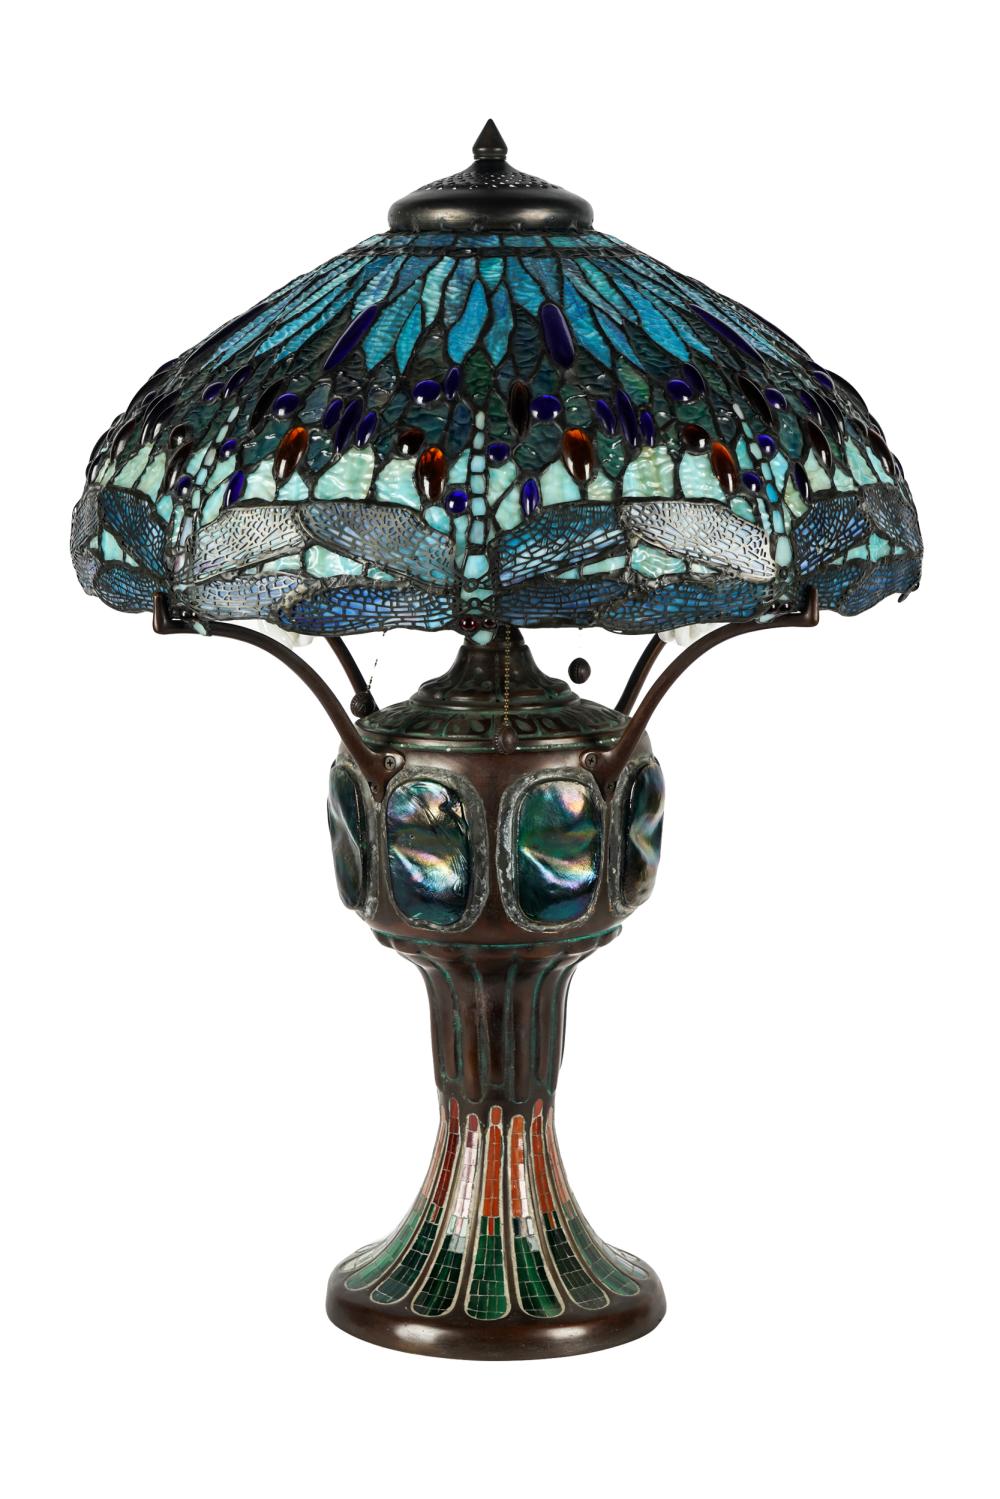 DALE TIFFANY-STYLE DRAGONFLY TABLE